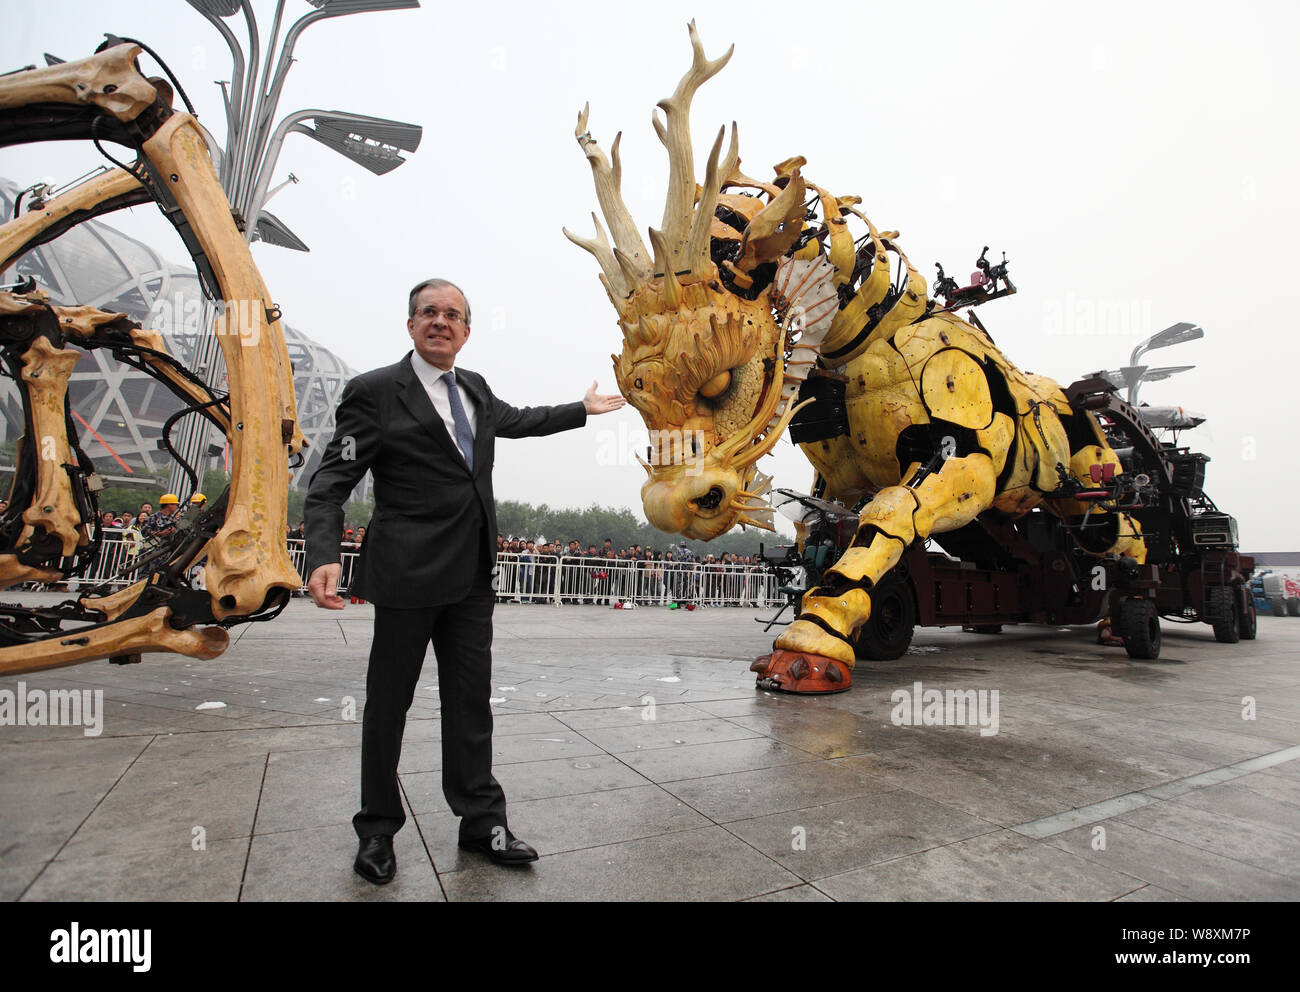 French Ambassador to China Maurice Gourdault-Montagne shows the horse-dragon sculpture, right, in front of the Bird's Nest Stadium at the Olympic Gree Stock Photo